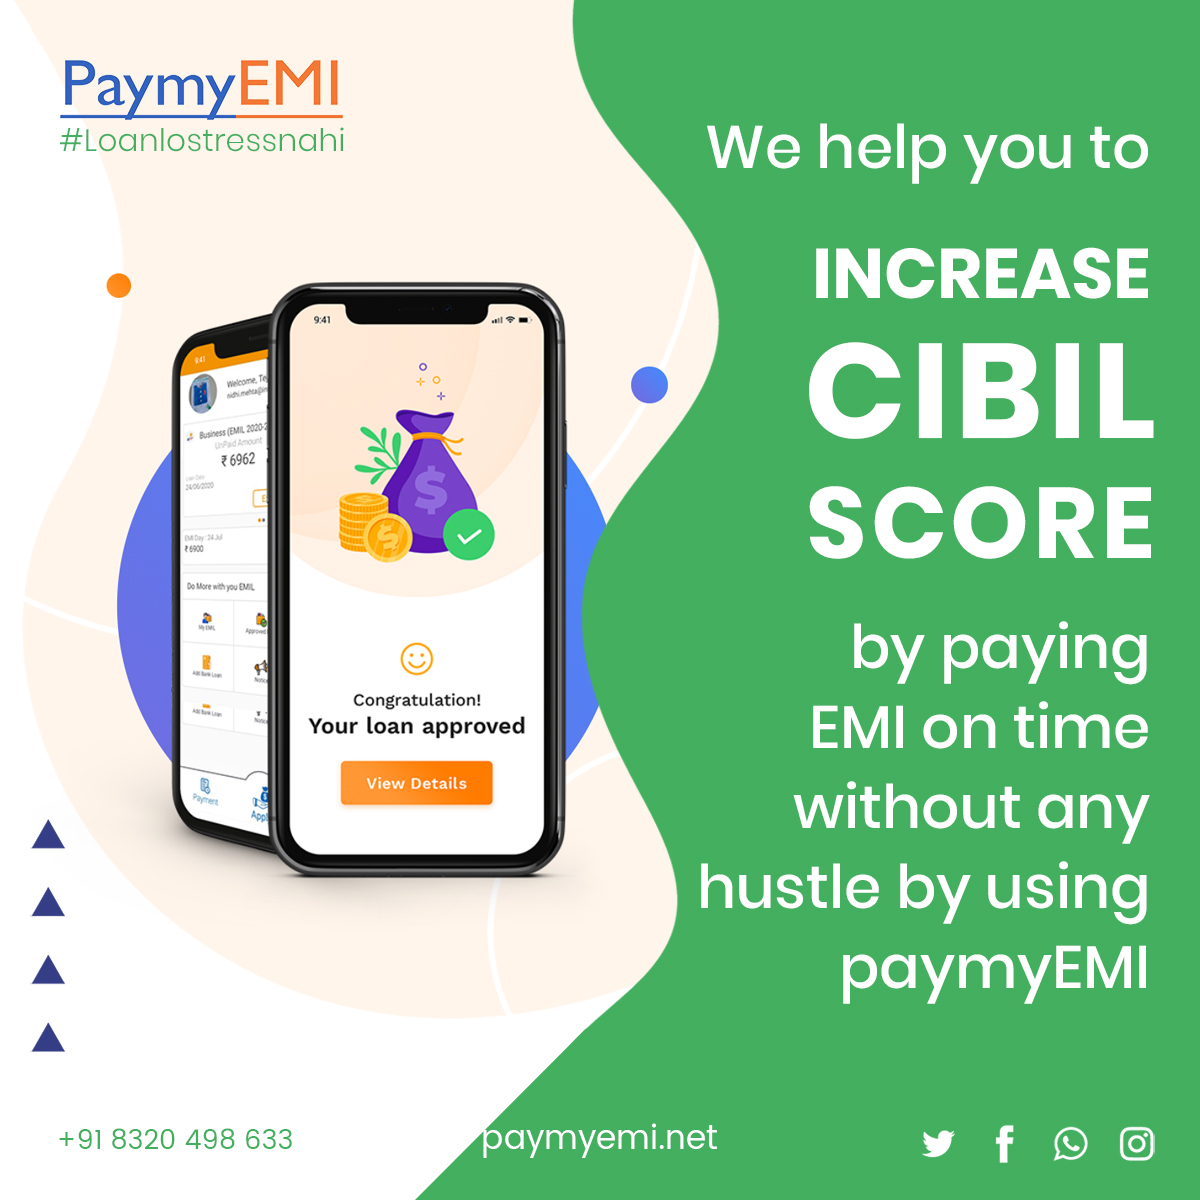 We help you to Increase your CIBIL Score by paying EMI on time without any hustle by using paymyEMI.

#loanlostressnahi #paymyemi
#cibil #cibilscore #increase #increasecibil #credit #creditrepair #creditsolution #financesolution #financialsolution #loan #emiontime #lateemi